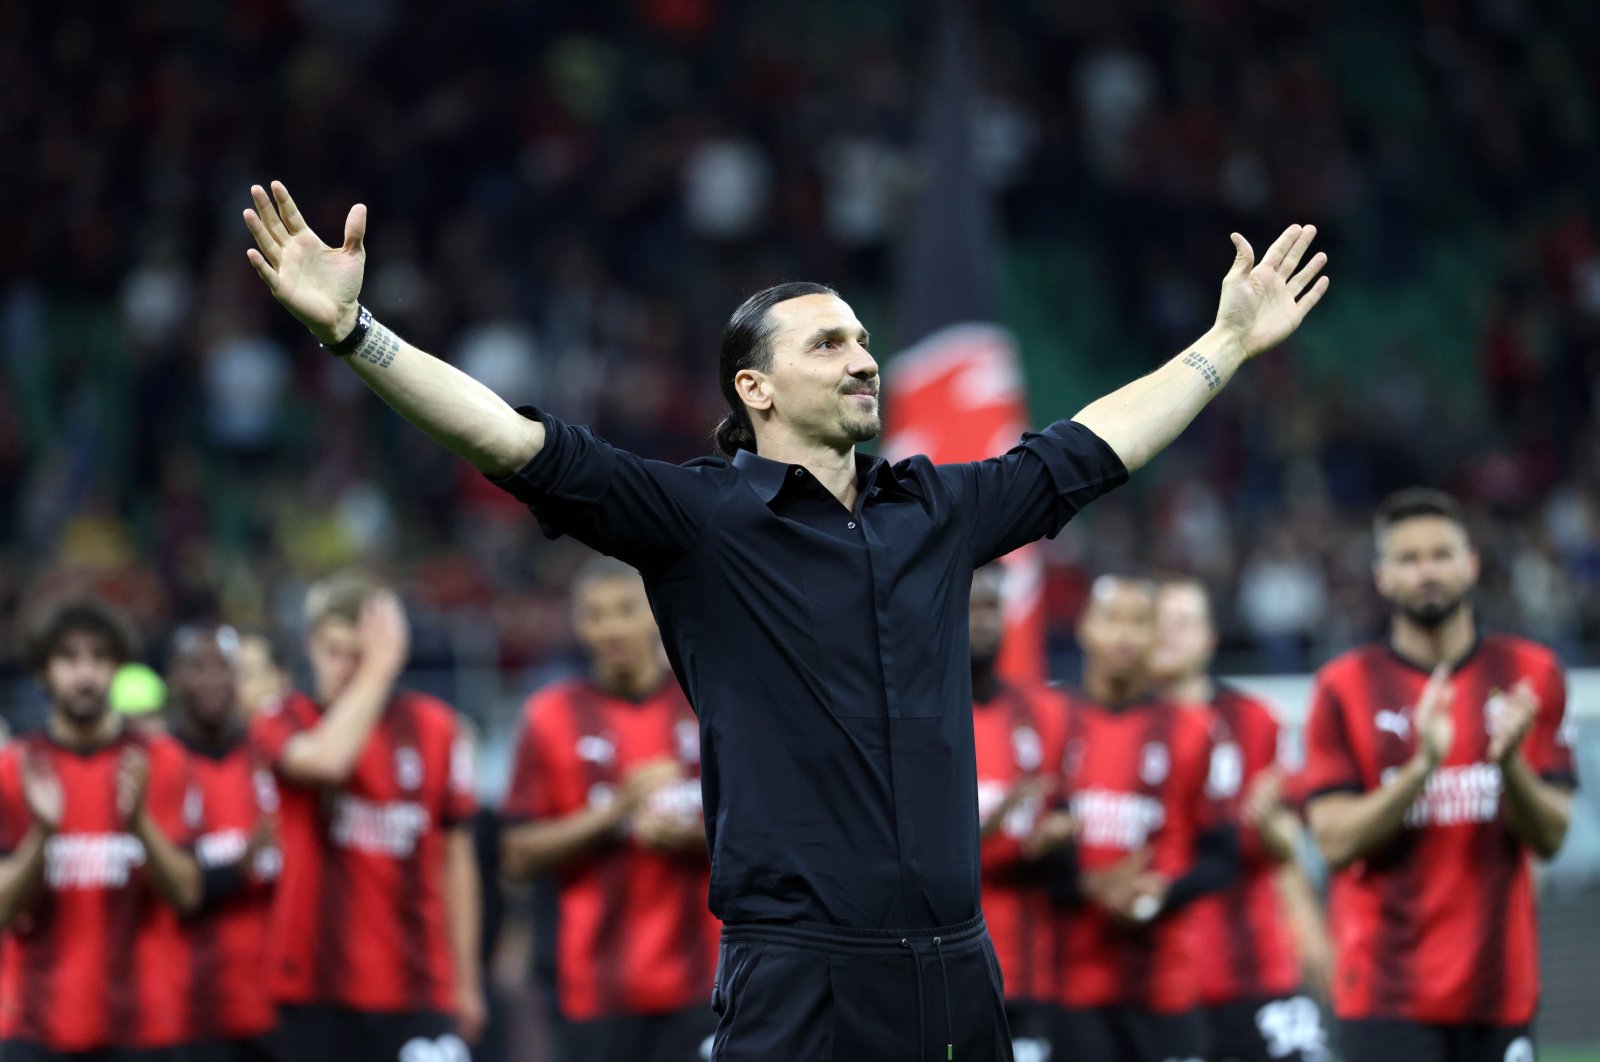 AC Milan’s Zlatan Ibrahimovic, who is due to leave the club, is celebrated by fans after the Italian Serie A match between AC Milan and Hellas Verona, Milan, Italy, June 4, 2023. (EPA Photo)